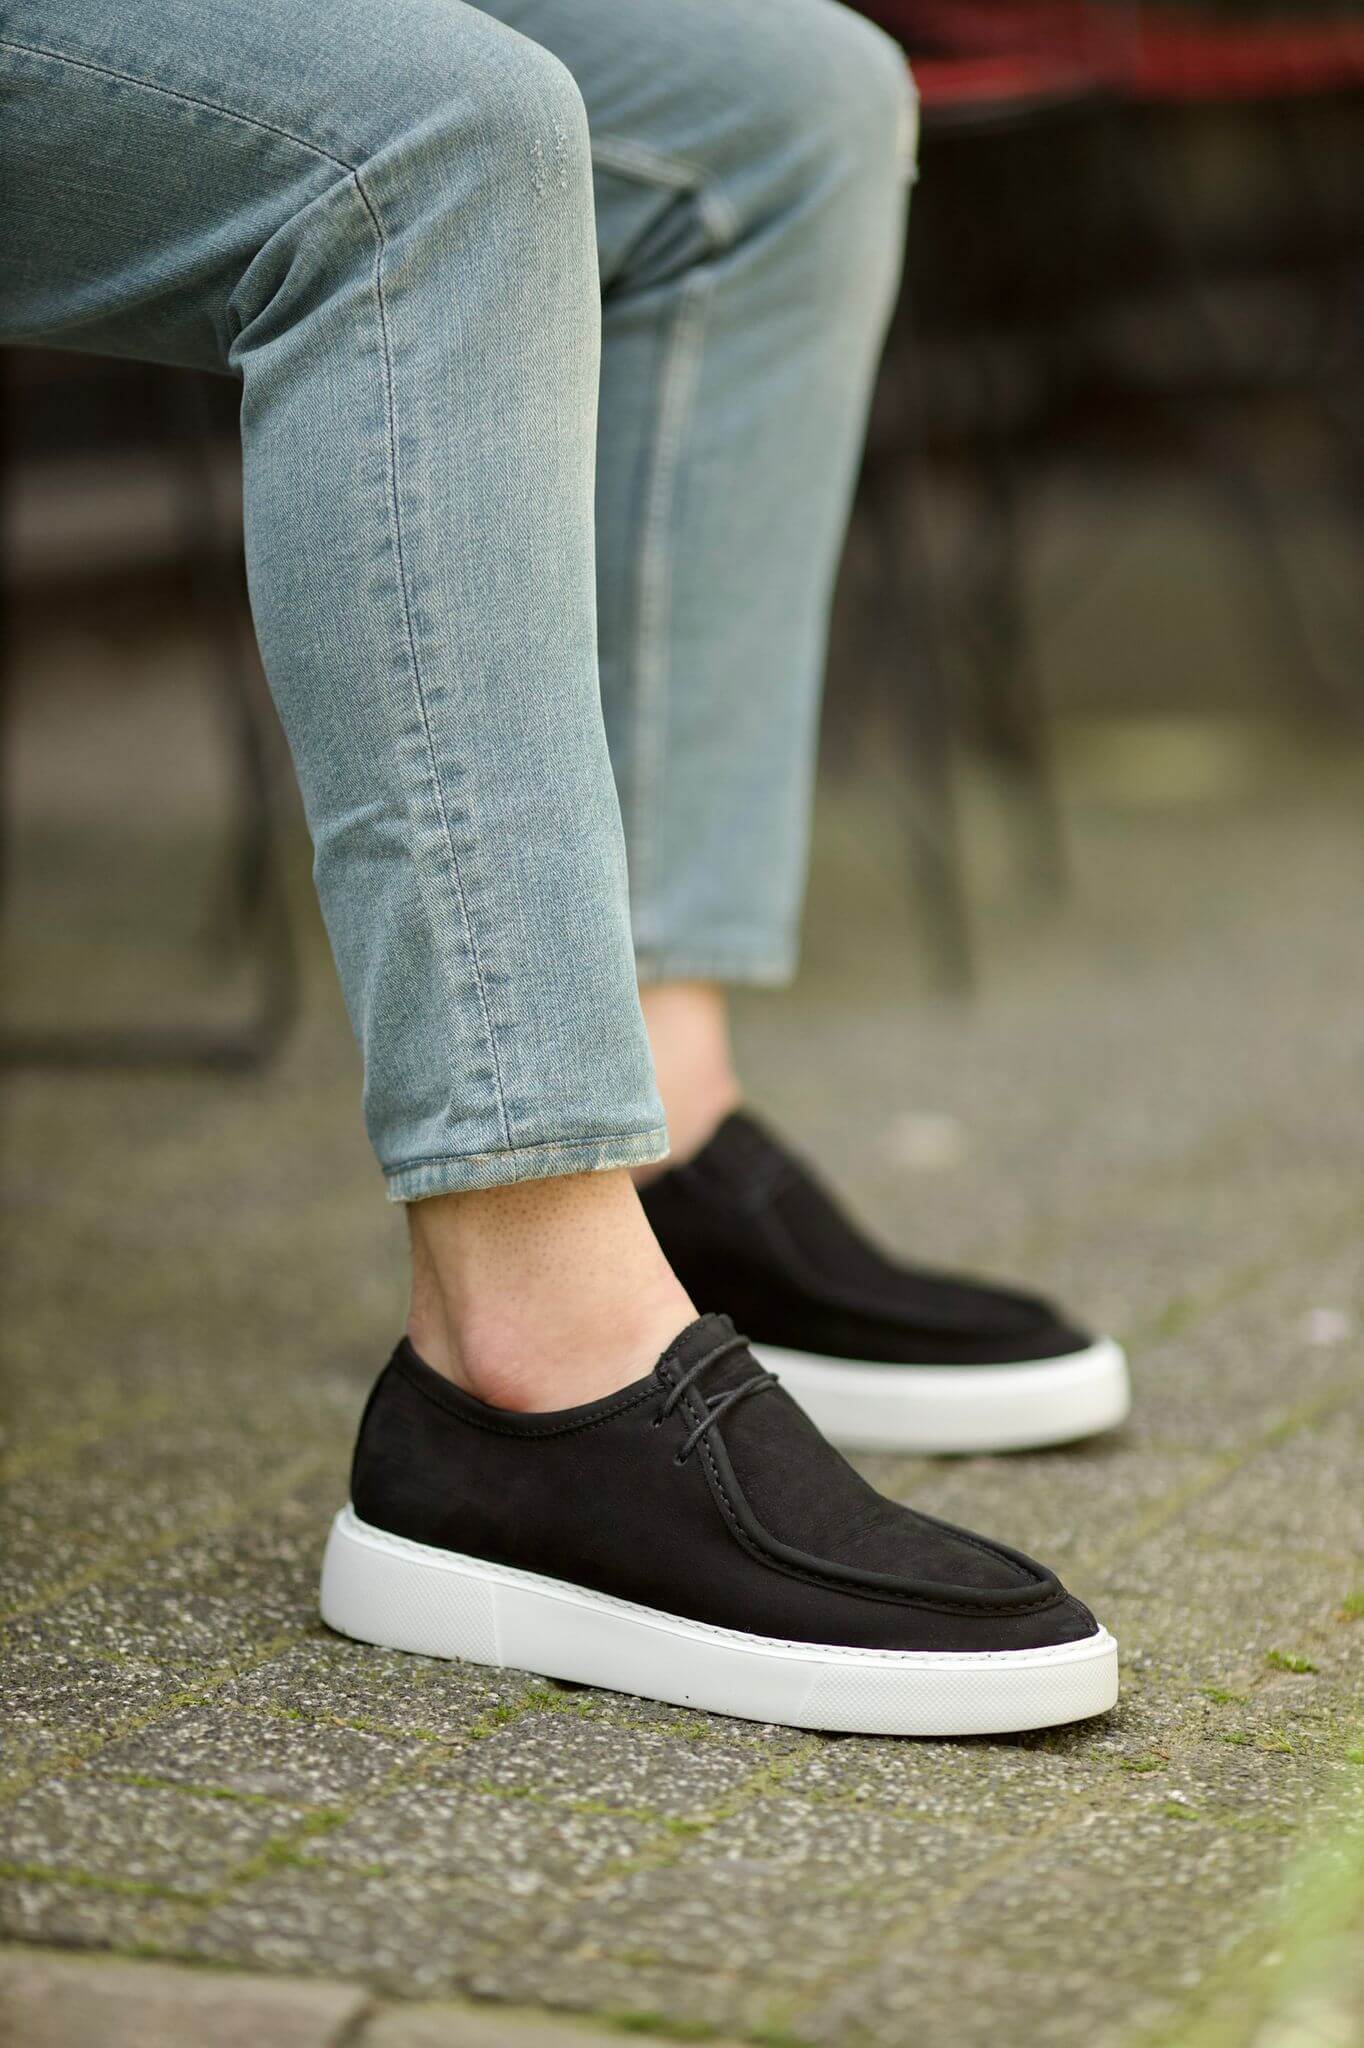 A Black Casual Lace Up on display.